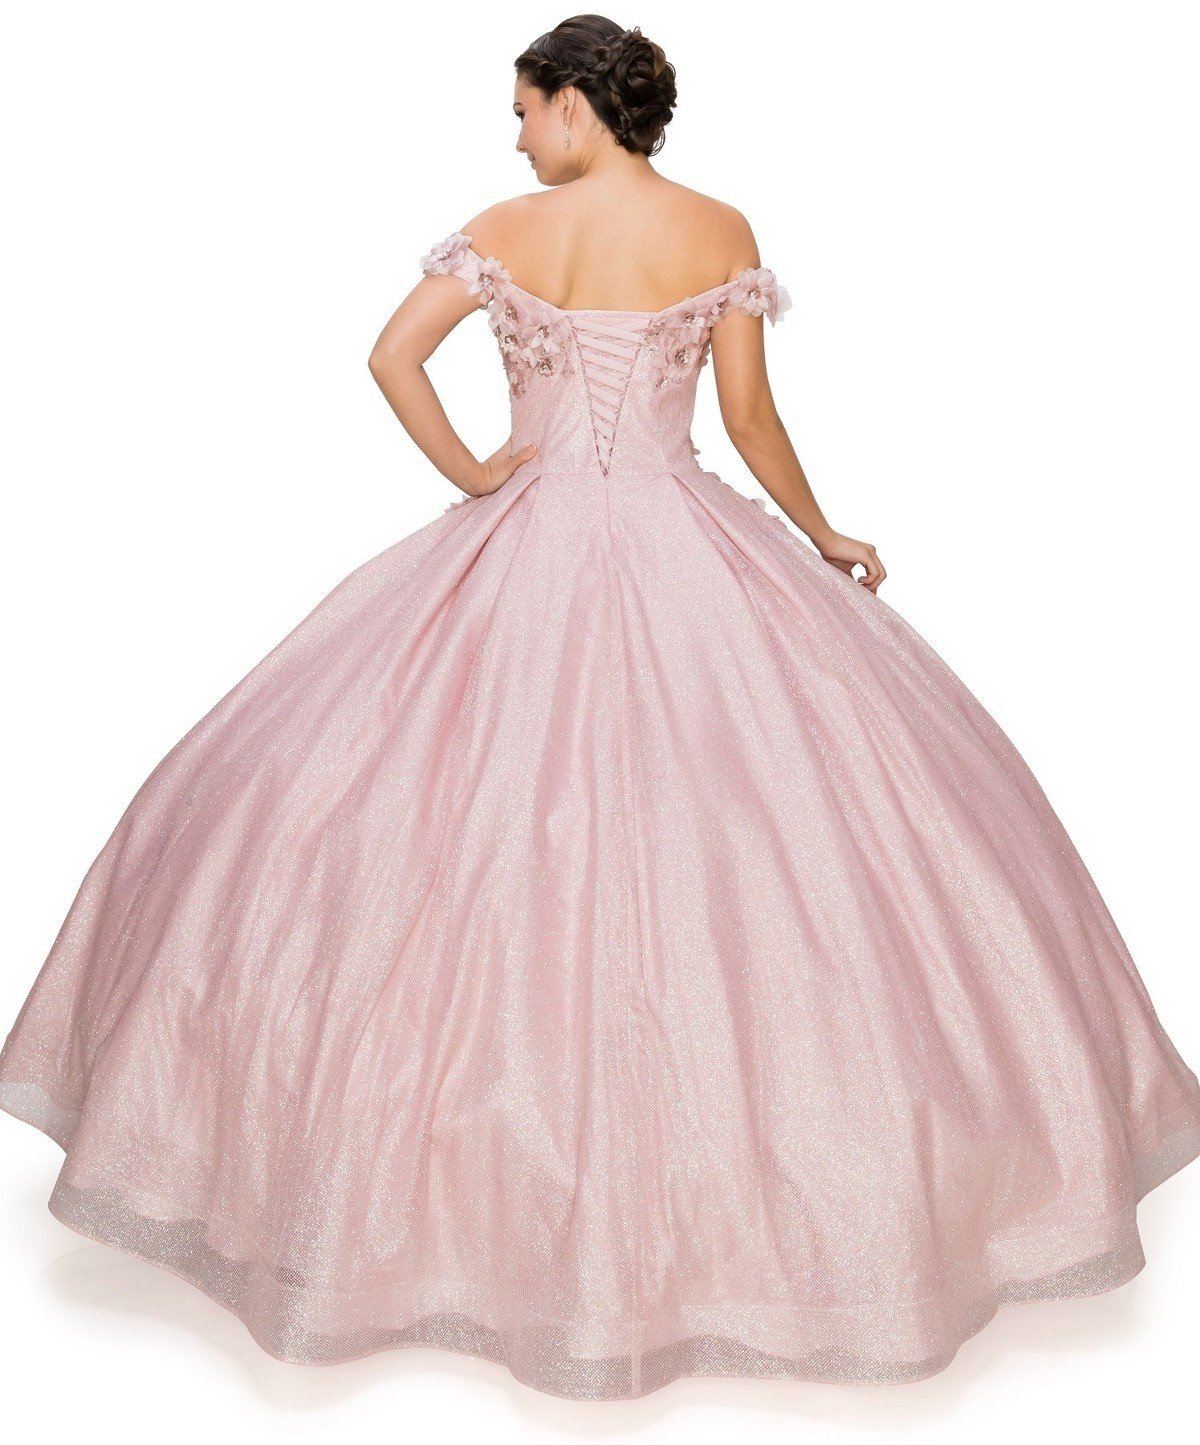 Off the Shoulder Floral Satin Tulle Quinceanera Dress by Cinderella Couture USA AS8020J-drose